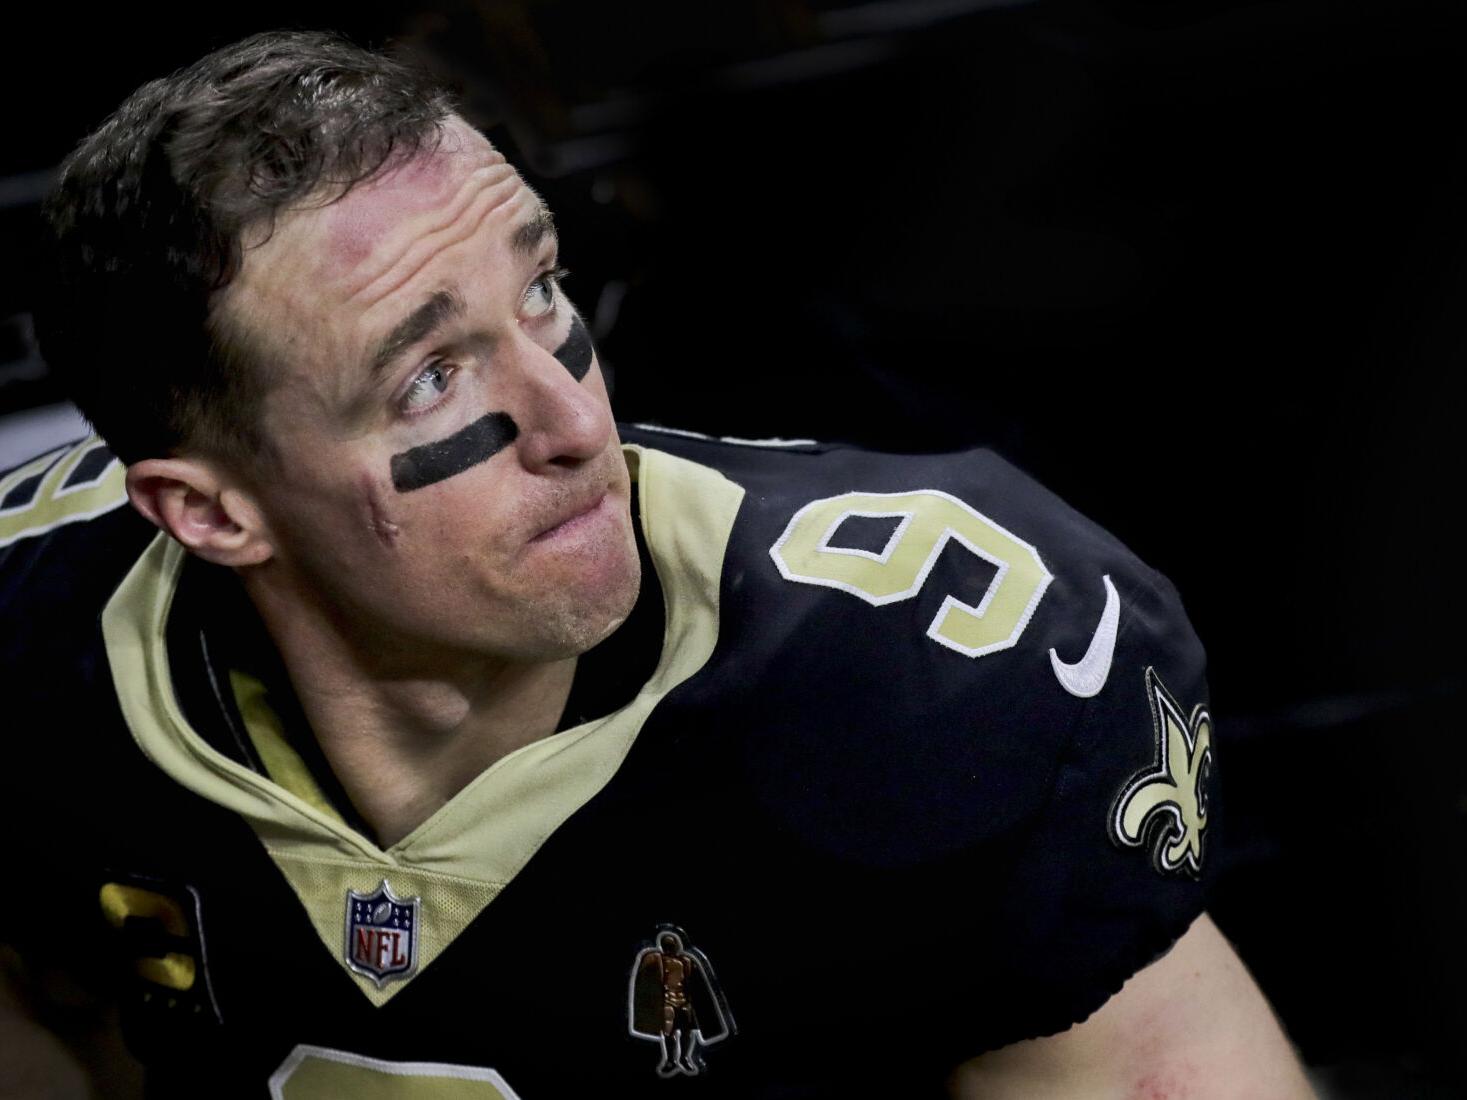 Drew Brees' final look back: As he left the field one last time